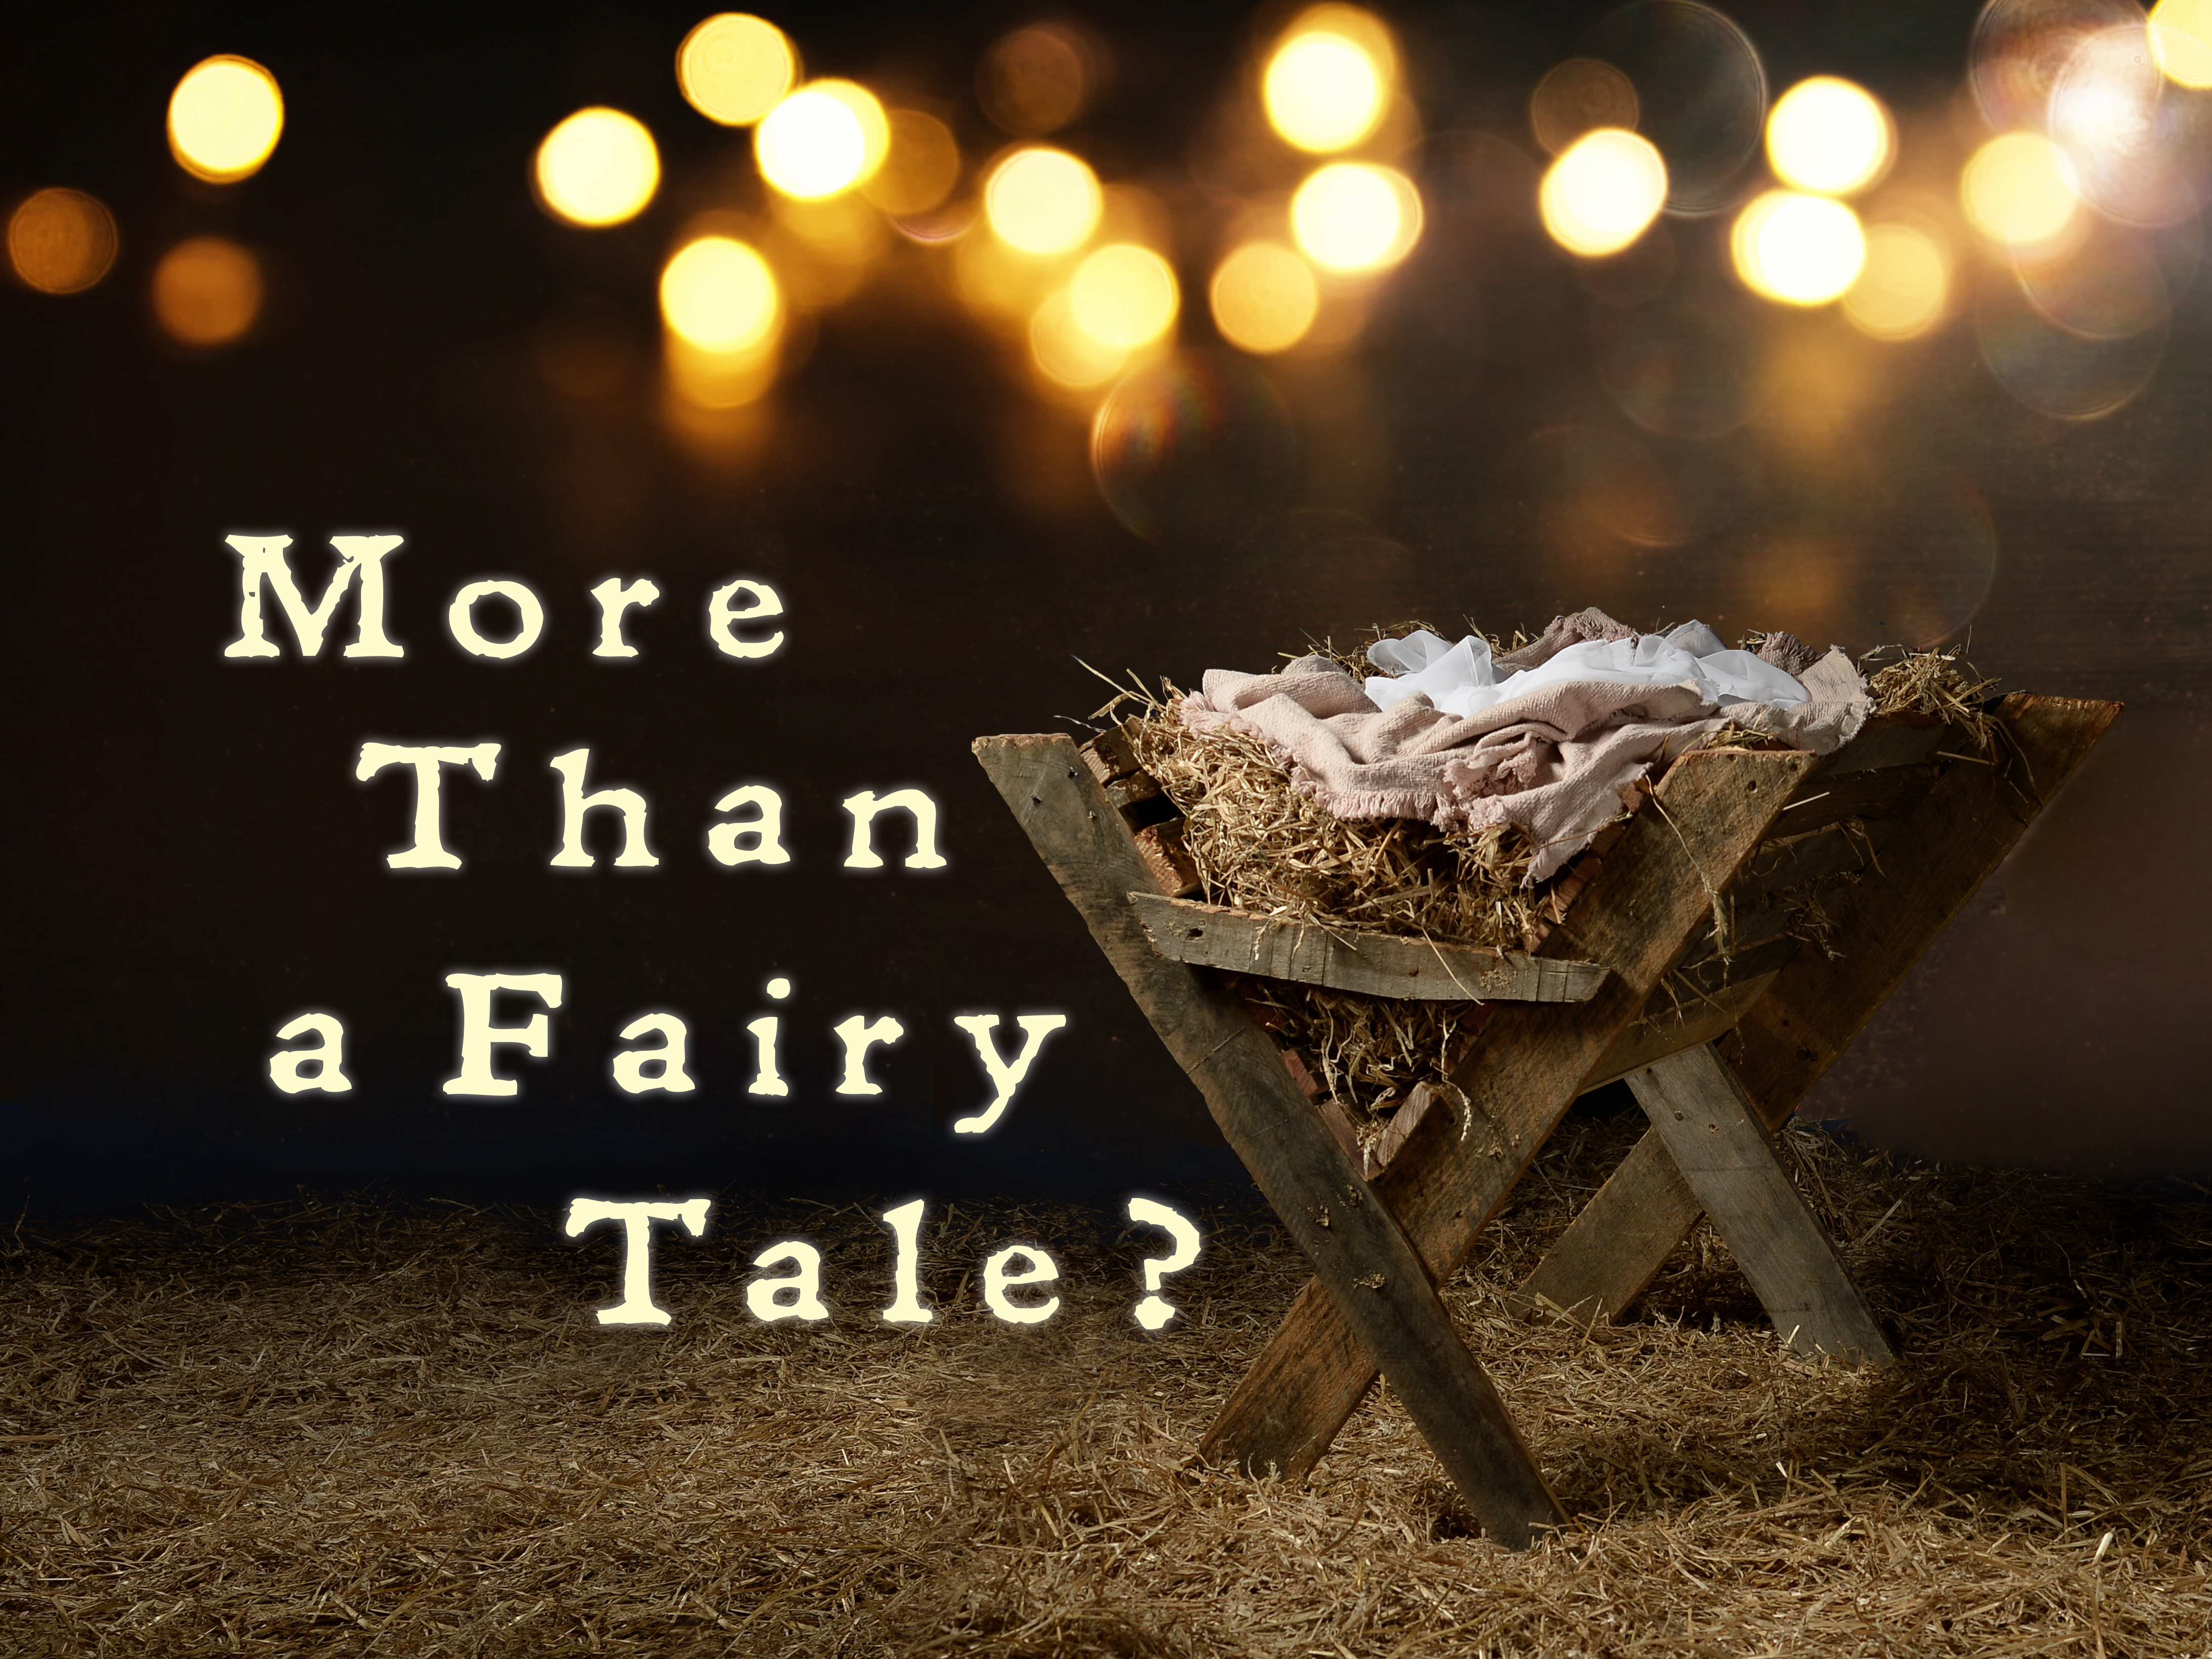 Advent 2018 - More Than a Fairy Tale?